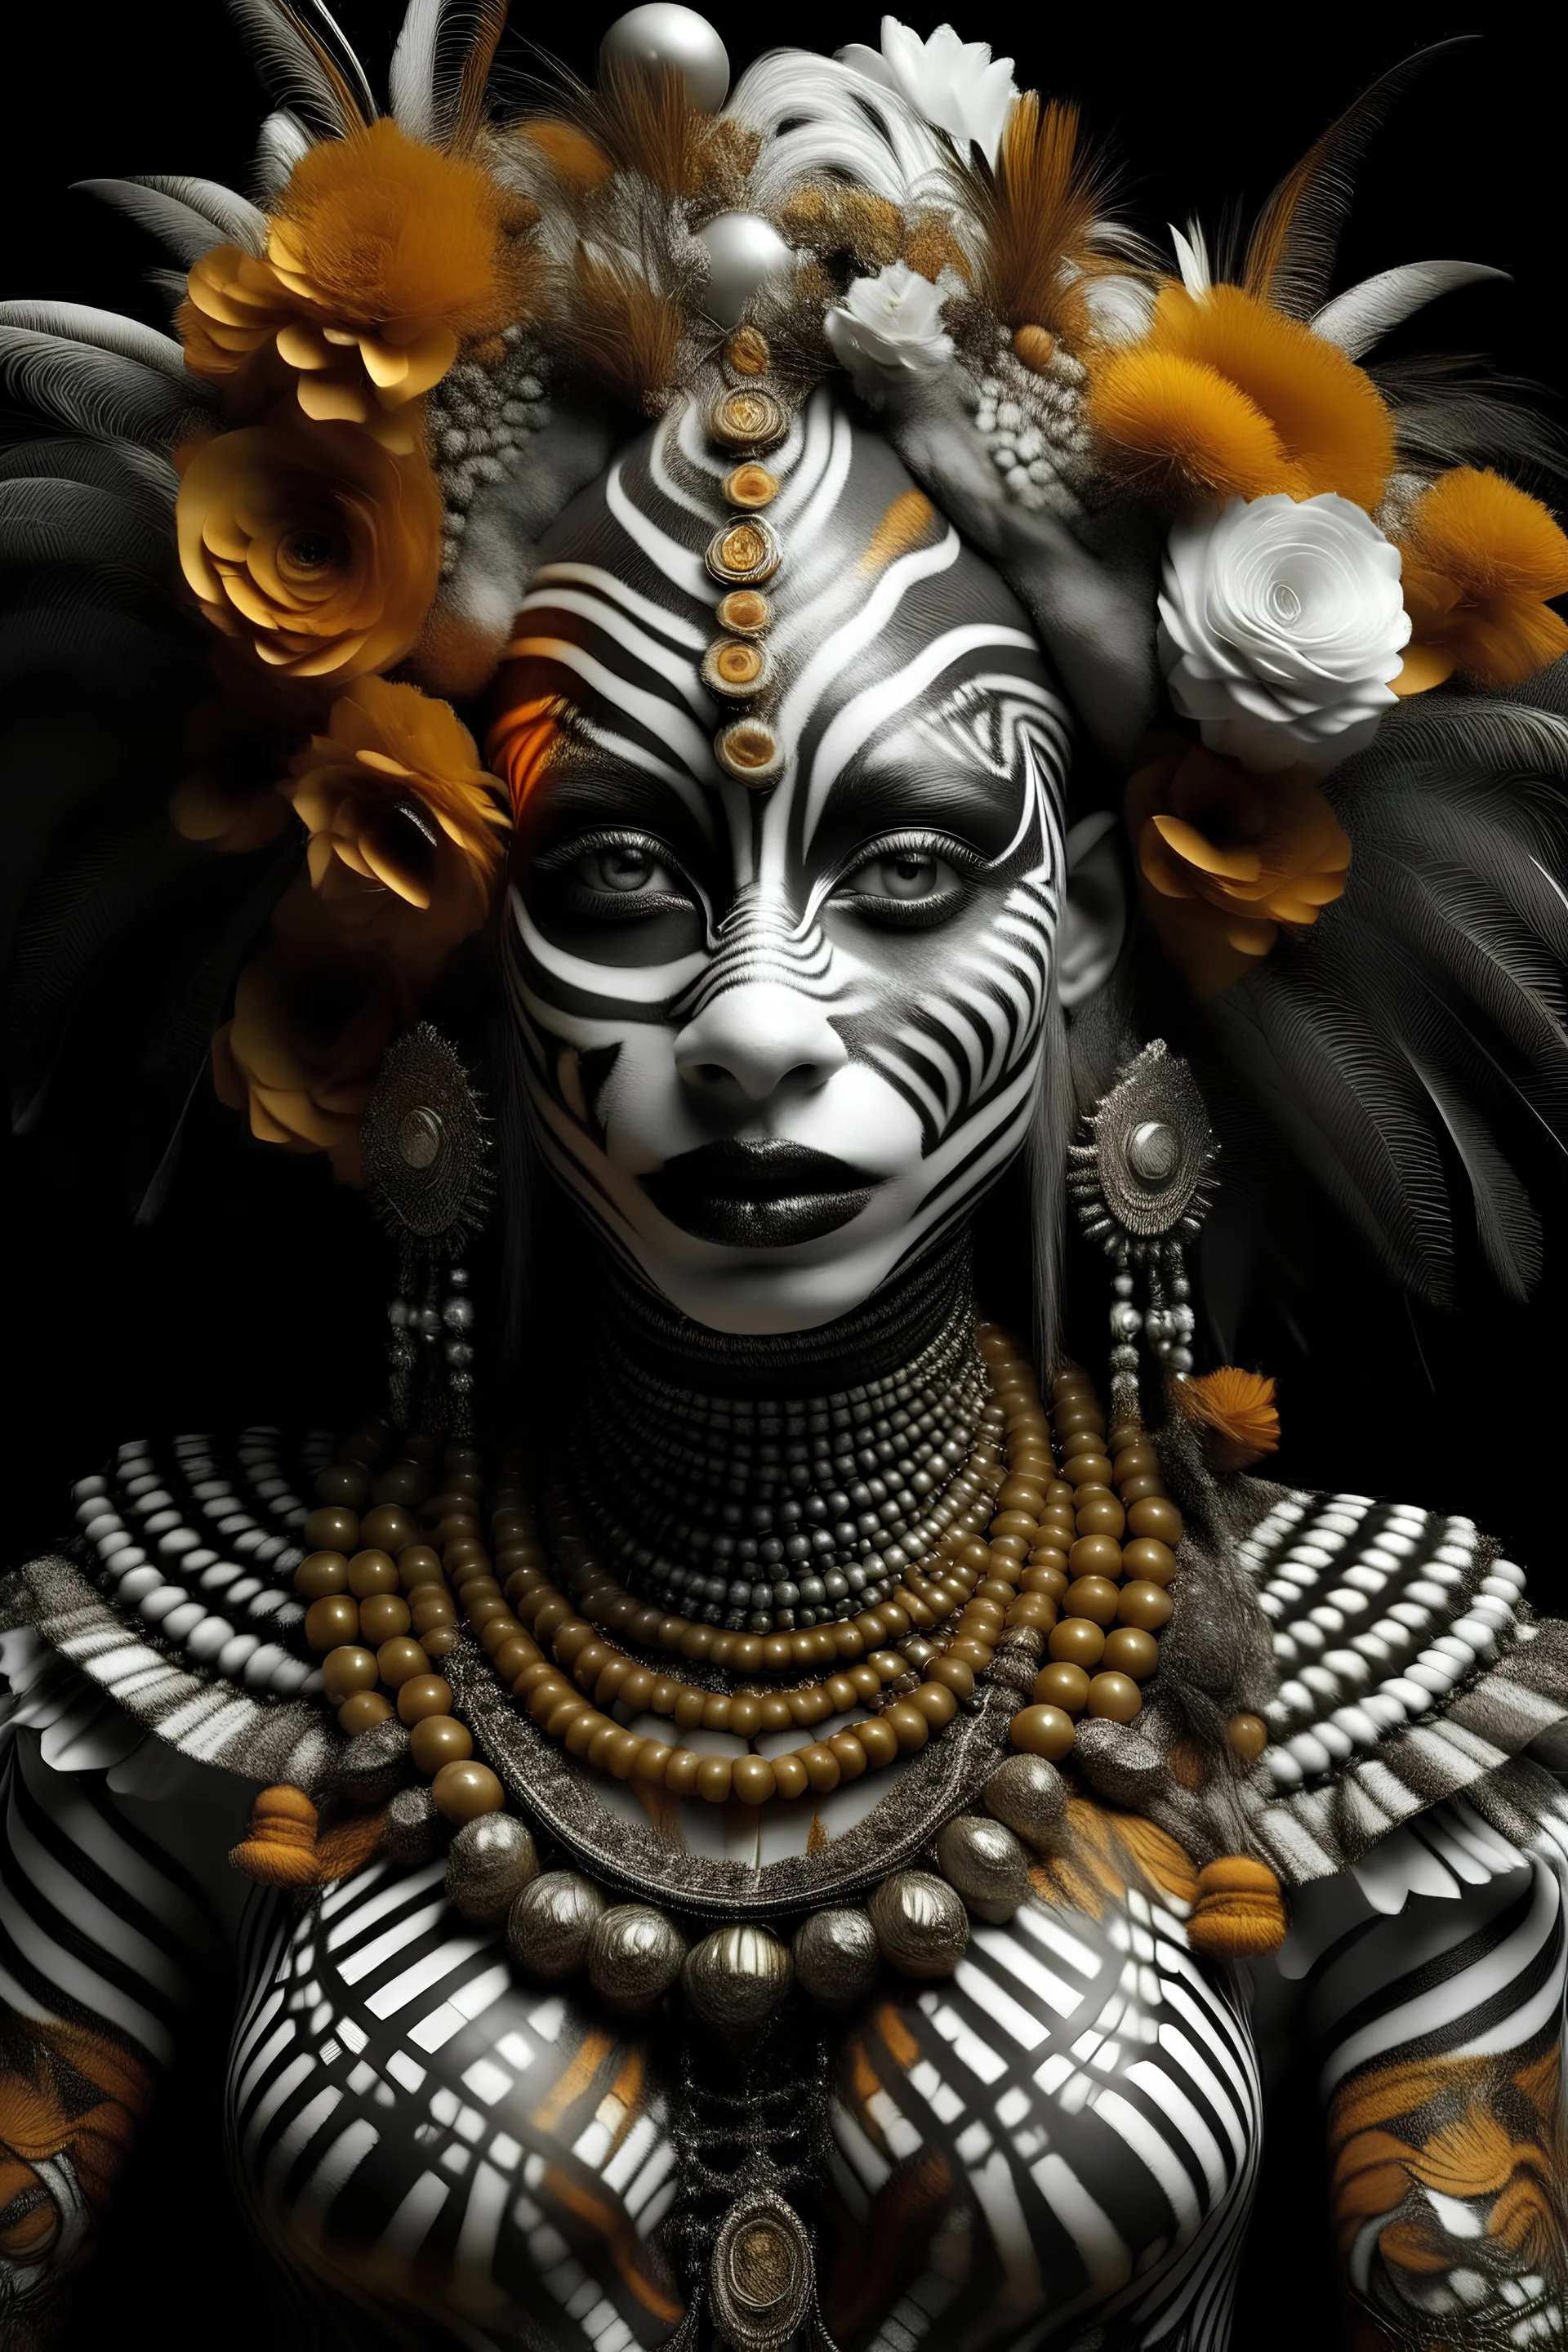 Beautiful humanoid l Zebra witch black and white, brown, orange and gold front wiev textured detailes skin,and fur portrait, wearing rococo style black floral ornate headdress adorned with white Golden beads, gold dust pearls organic bio spinal ribbed detail of rococo floral, white african background extremely detailed, athmoshpheric, hyperrealistic maximálist concept art